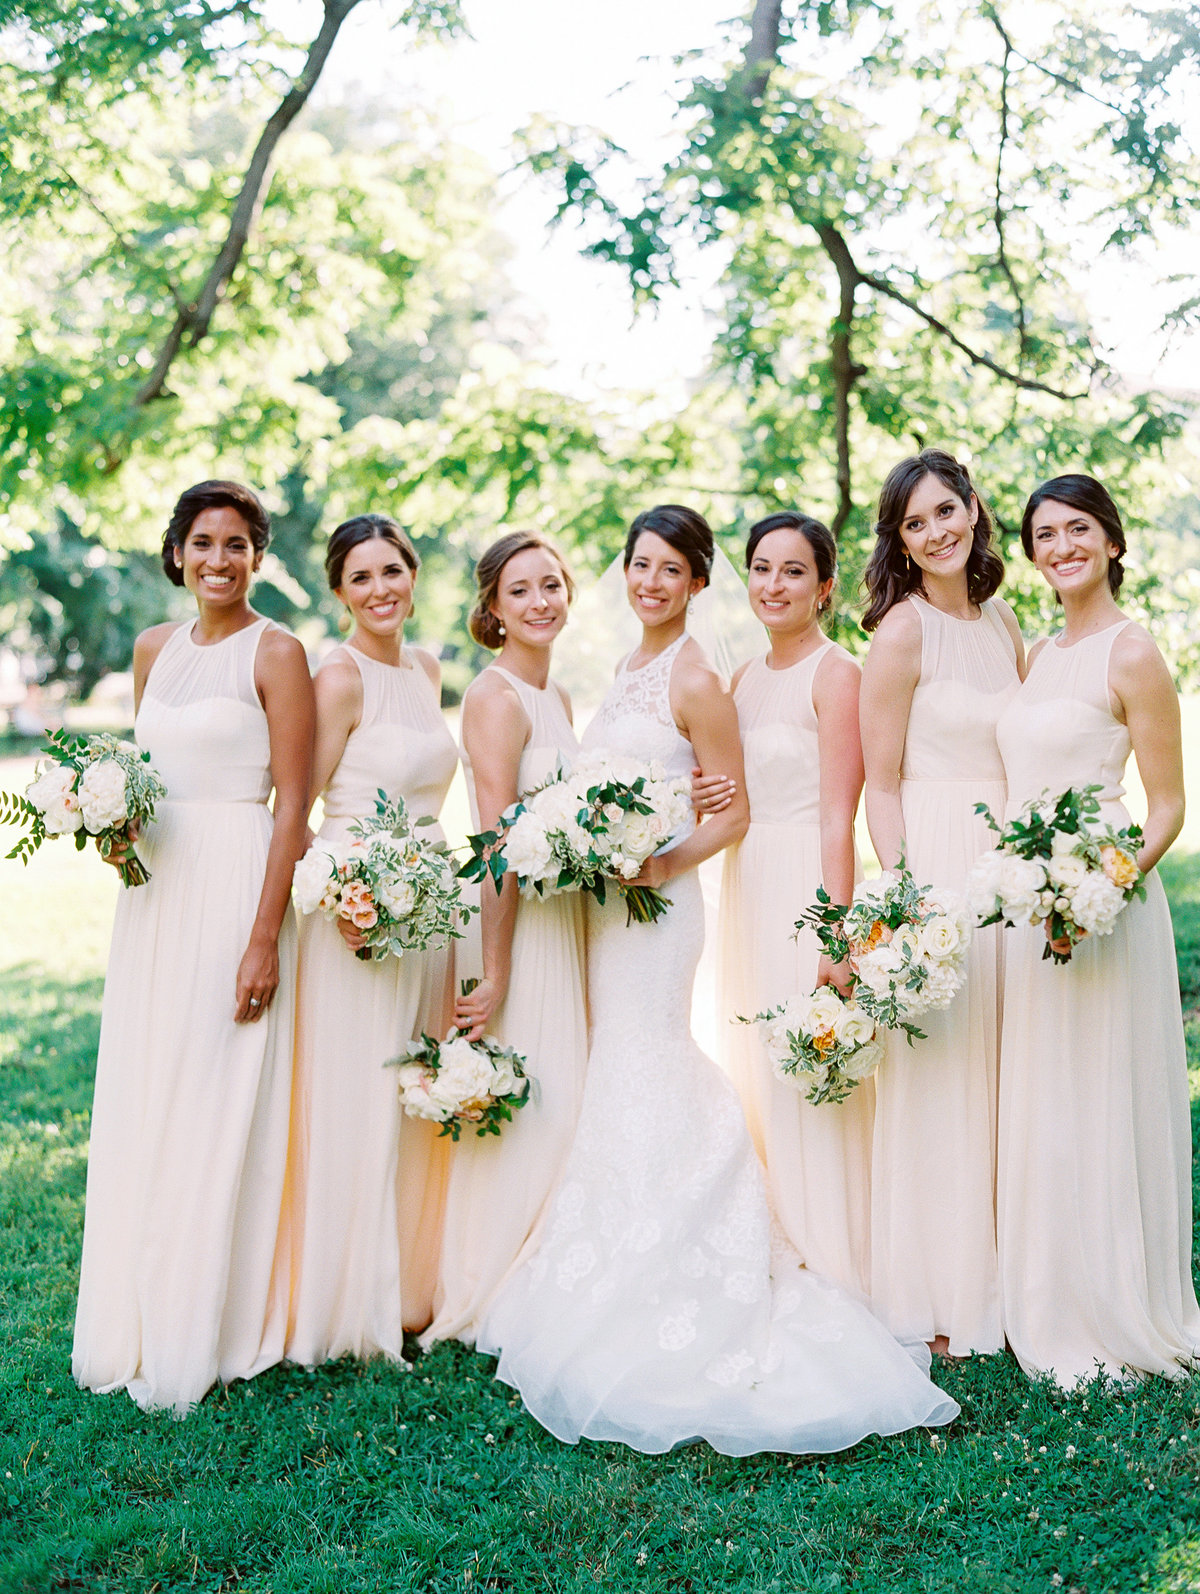 Bridesmaids in Cream Dresses with White and Green Bouquets © Bonnie Sen Photography